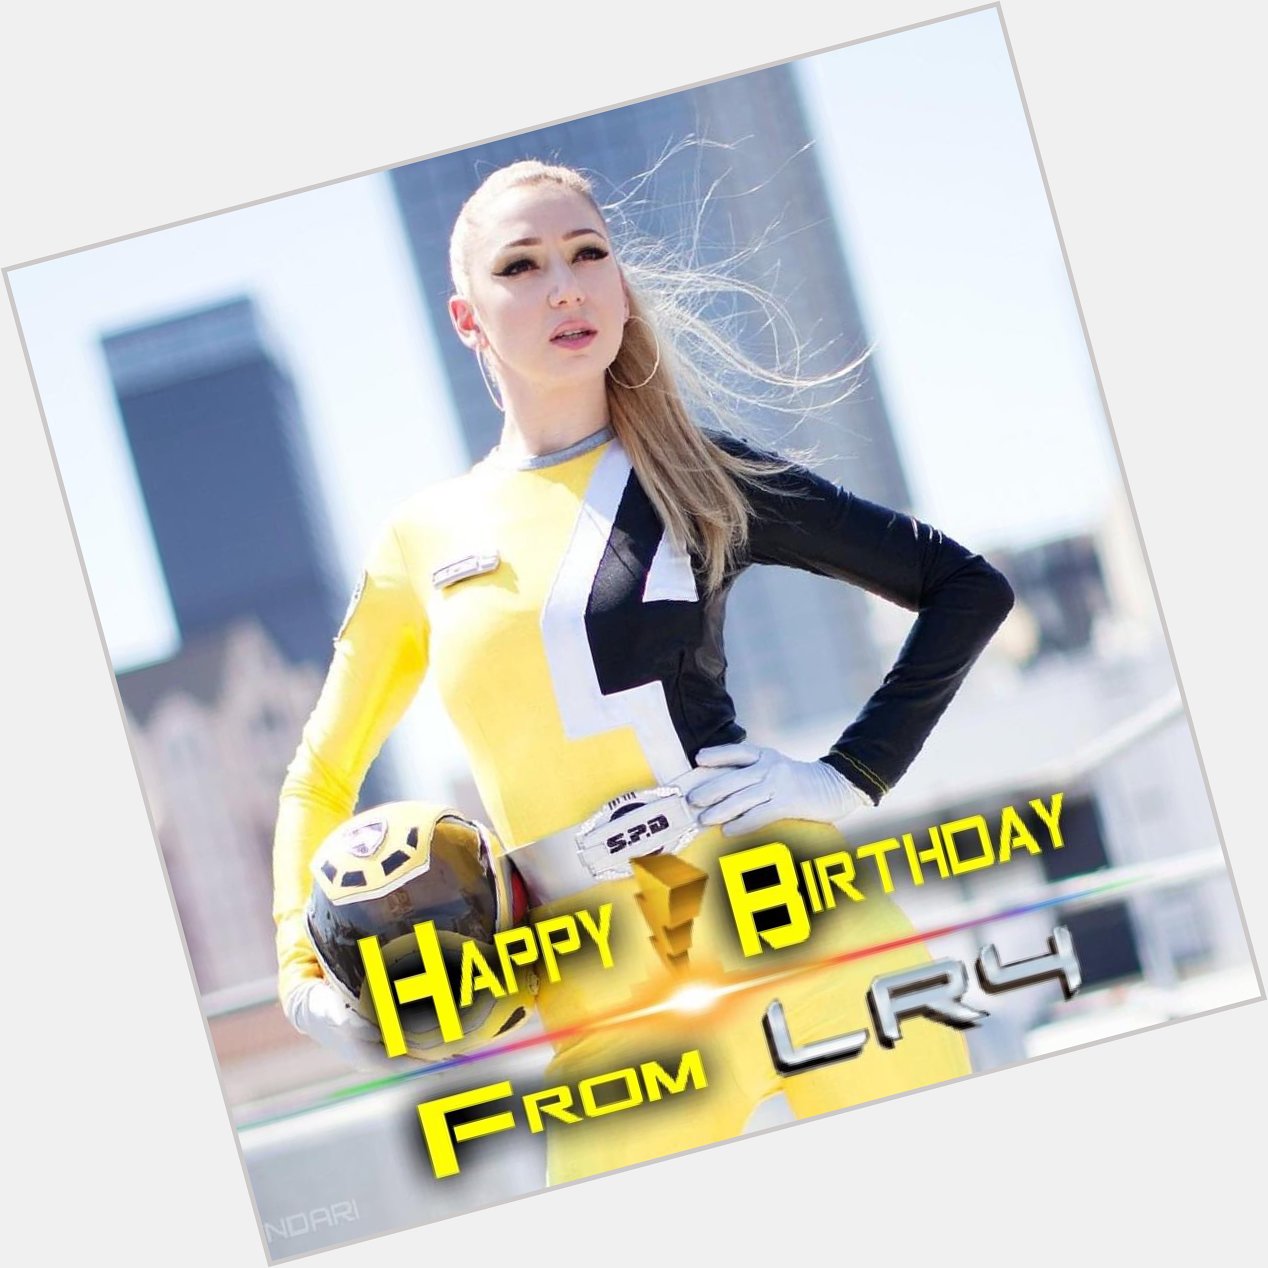 LR4 would like to wish Monica May a Happy Birthday! 